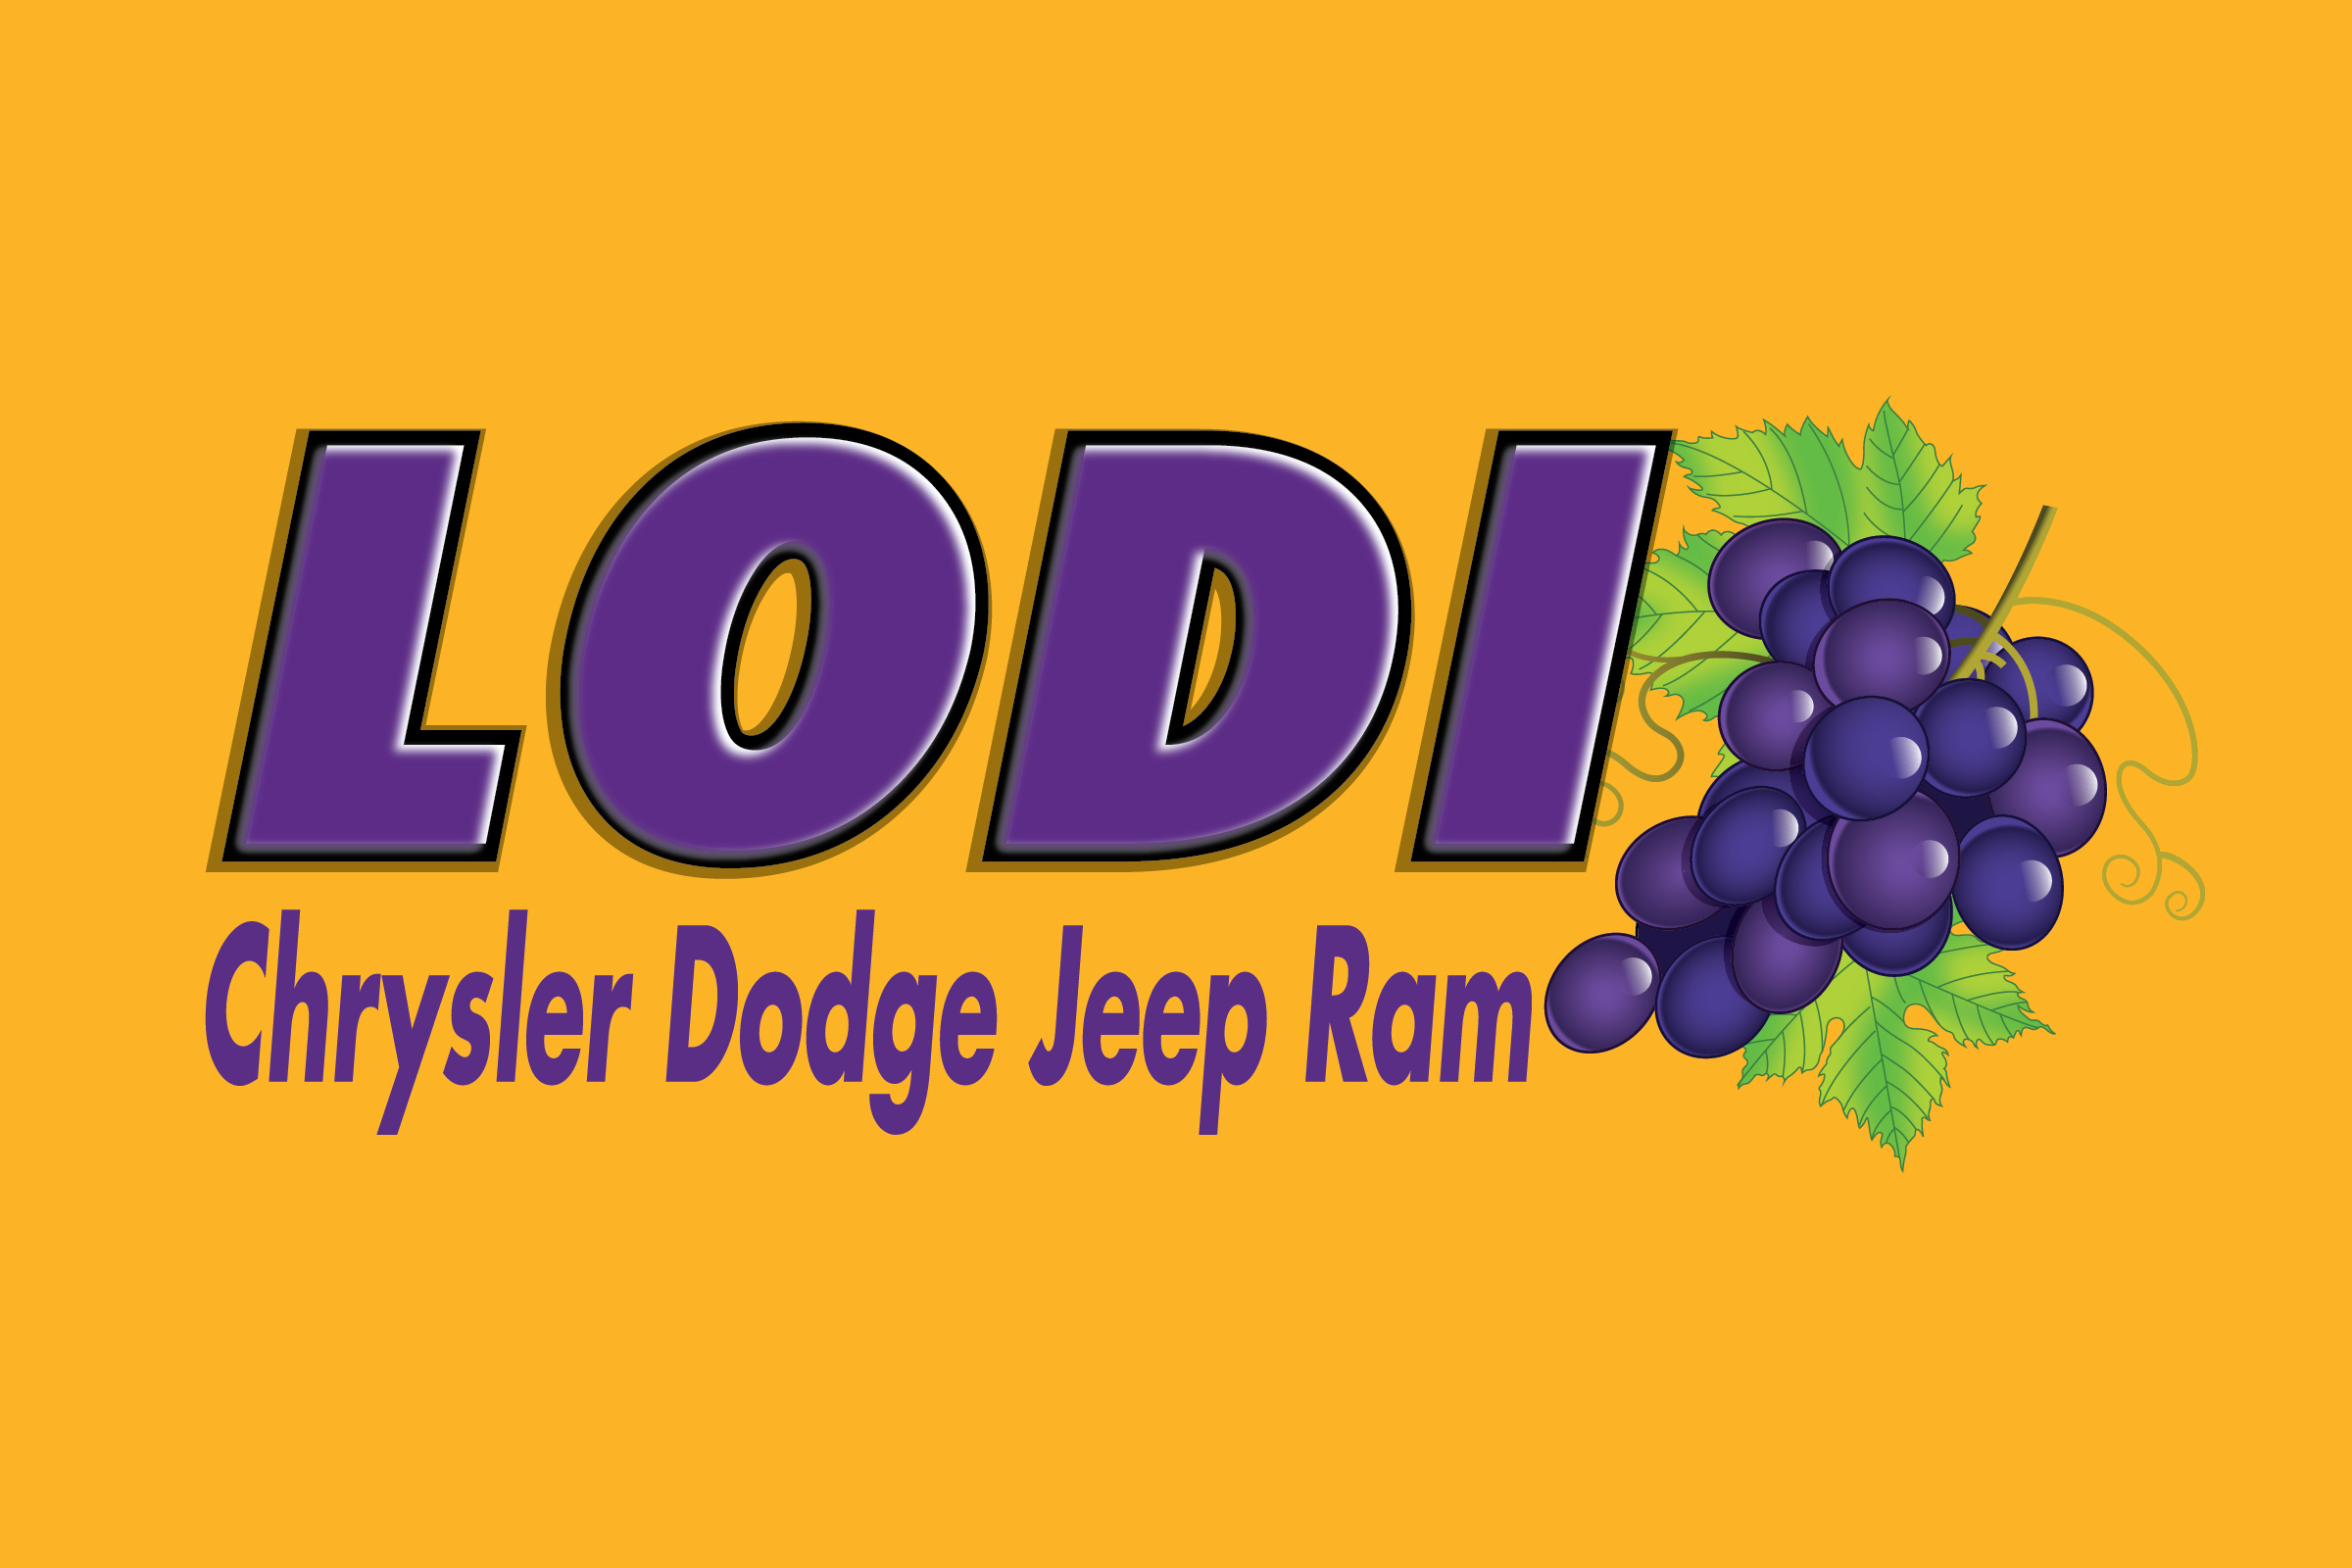 Lodi_with website Yellow BG_Full Color Option 1